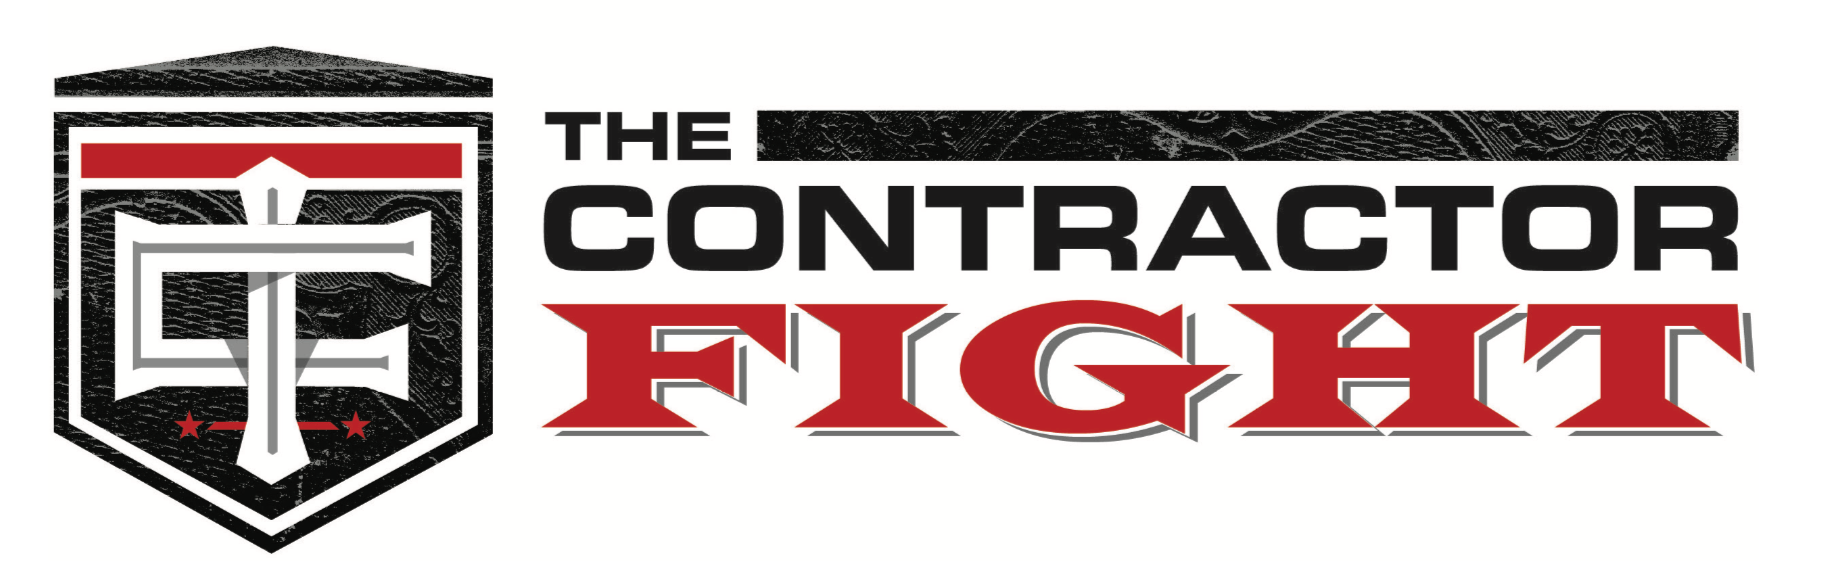 The Contractor Fight Gear